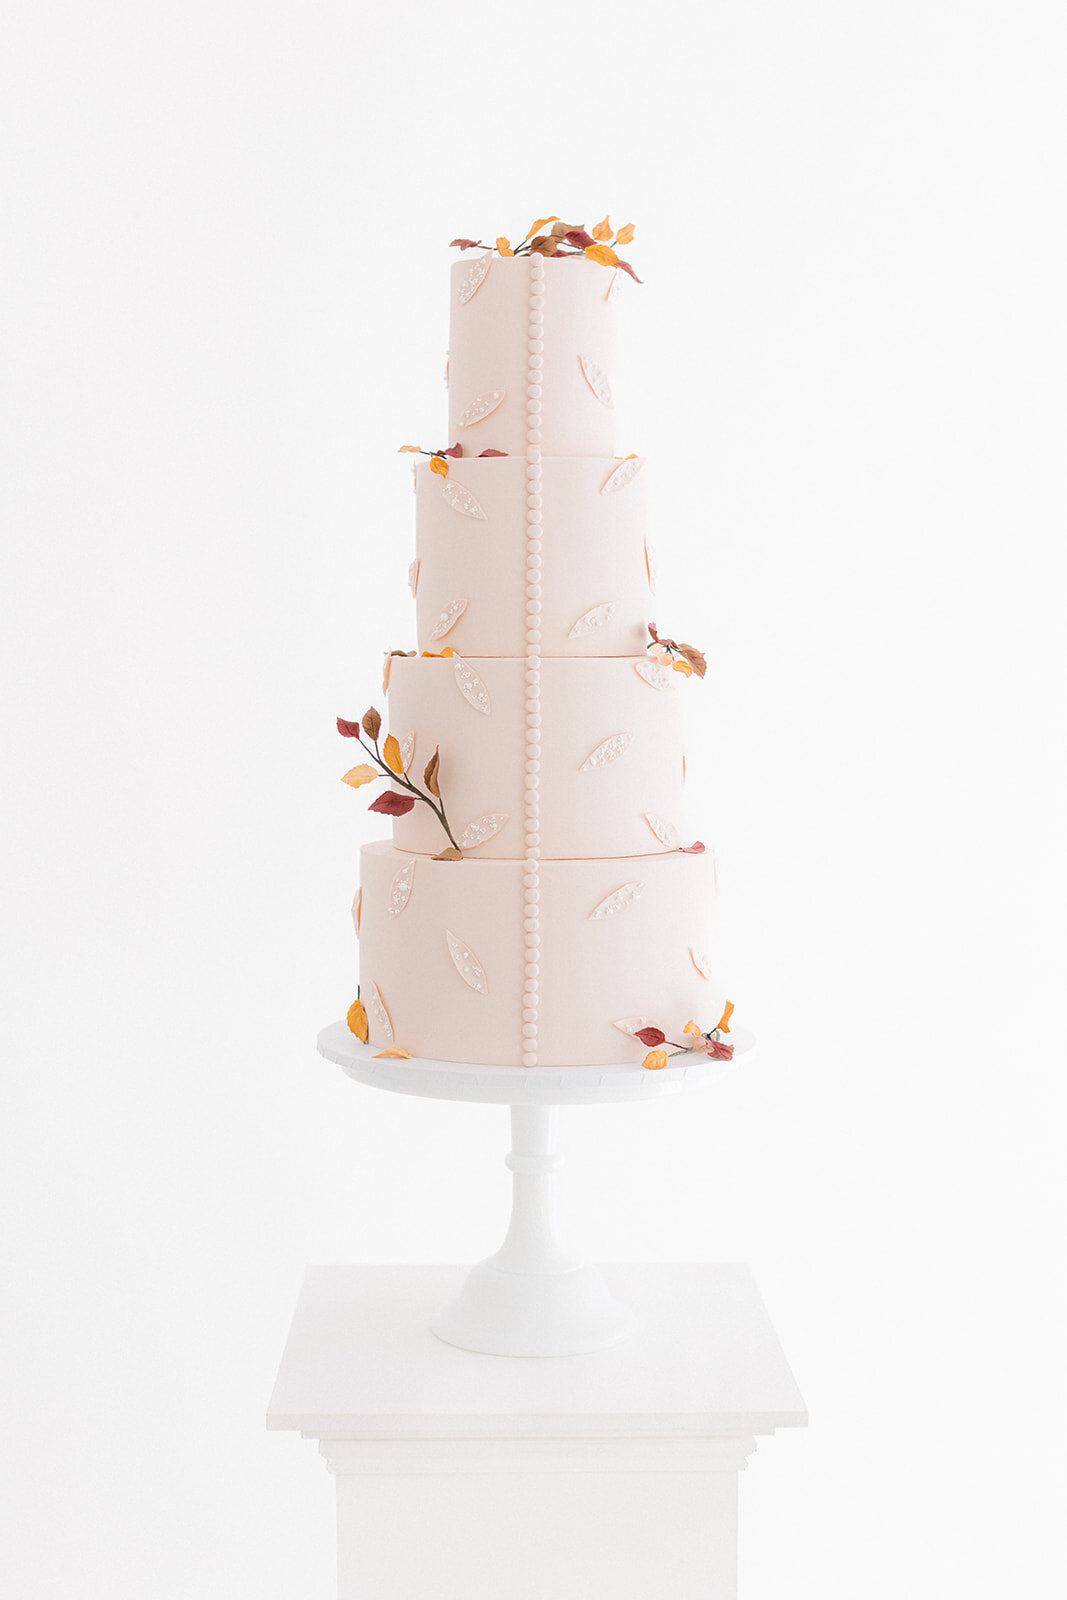 Autumn inspired wedding cake with autumn leaves, beading and buttons